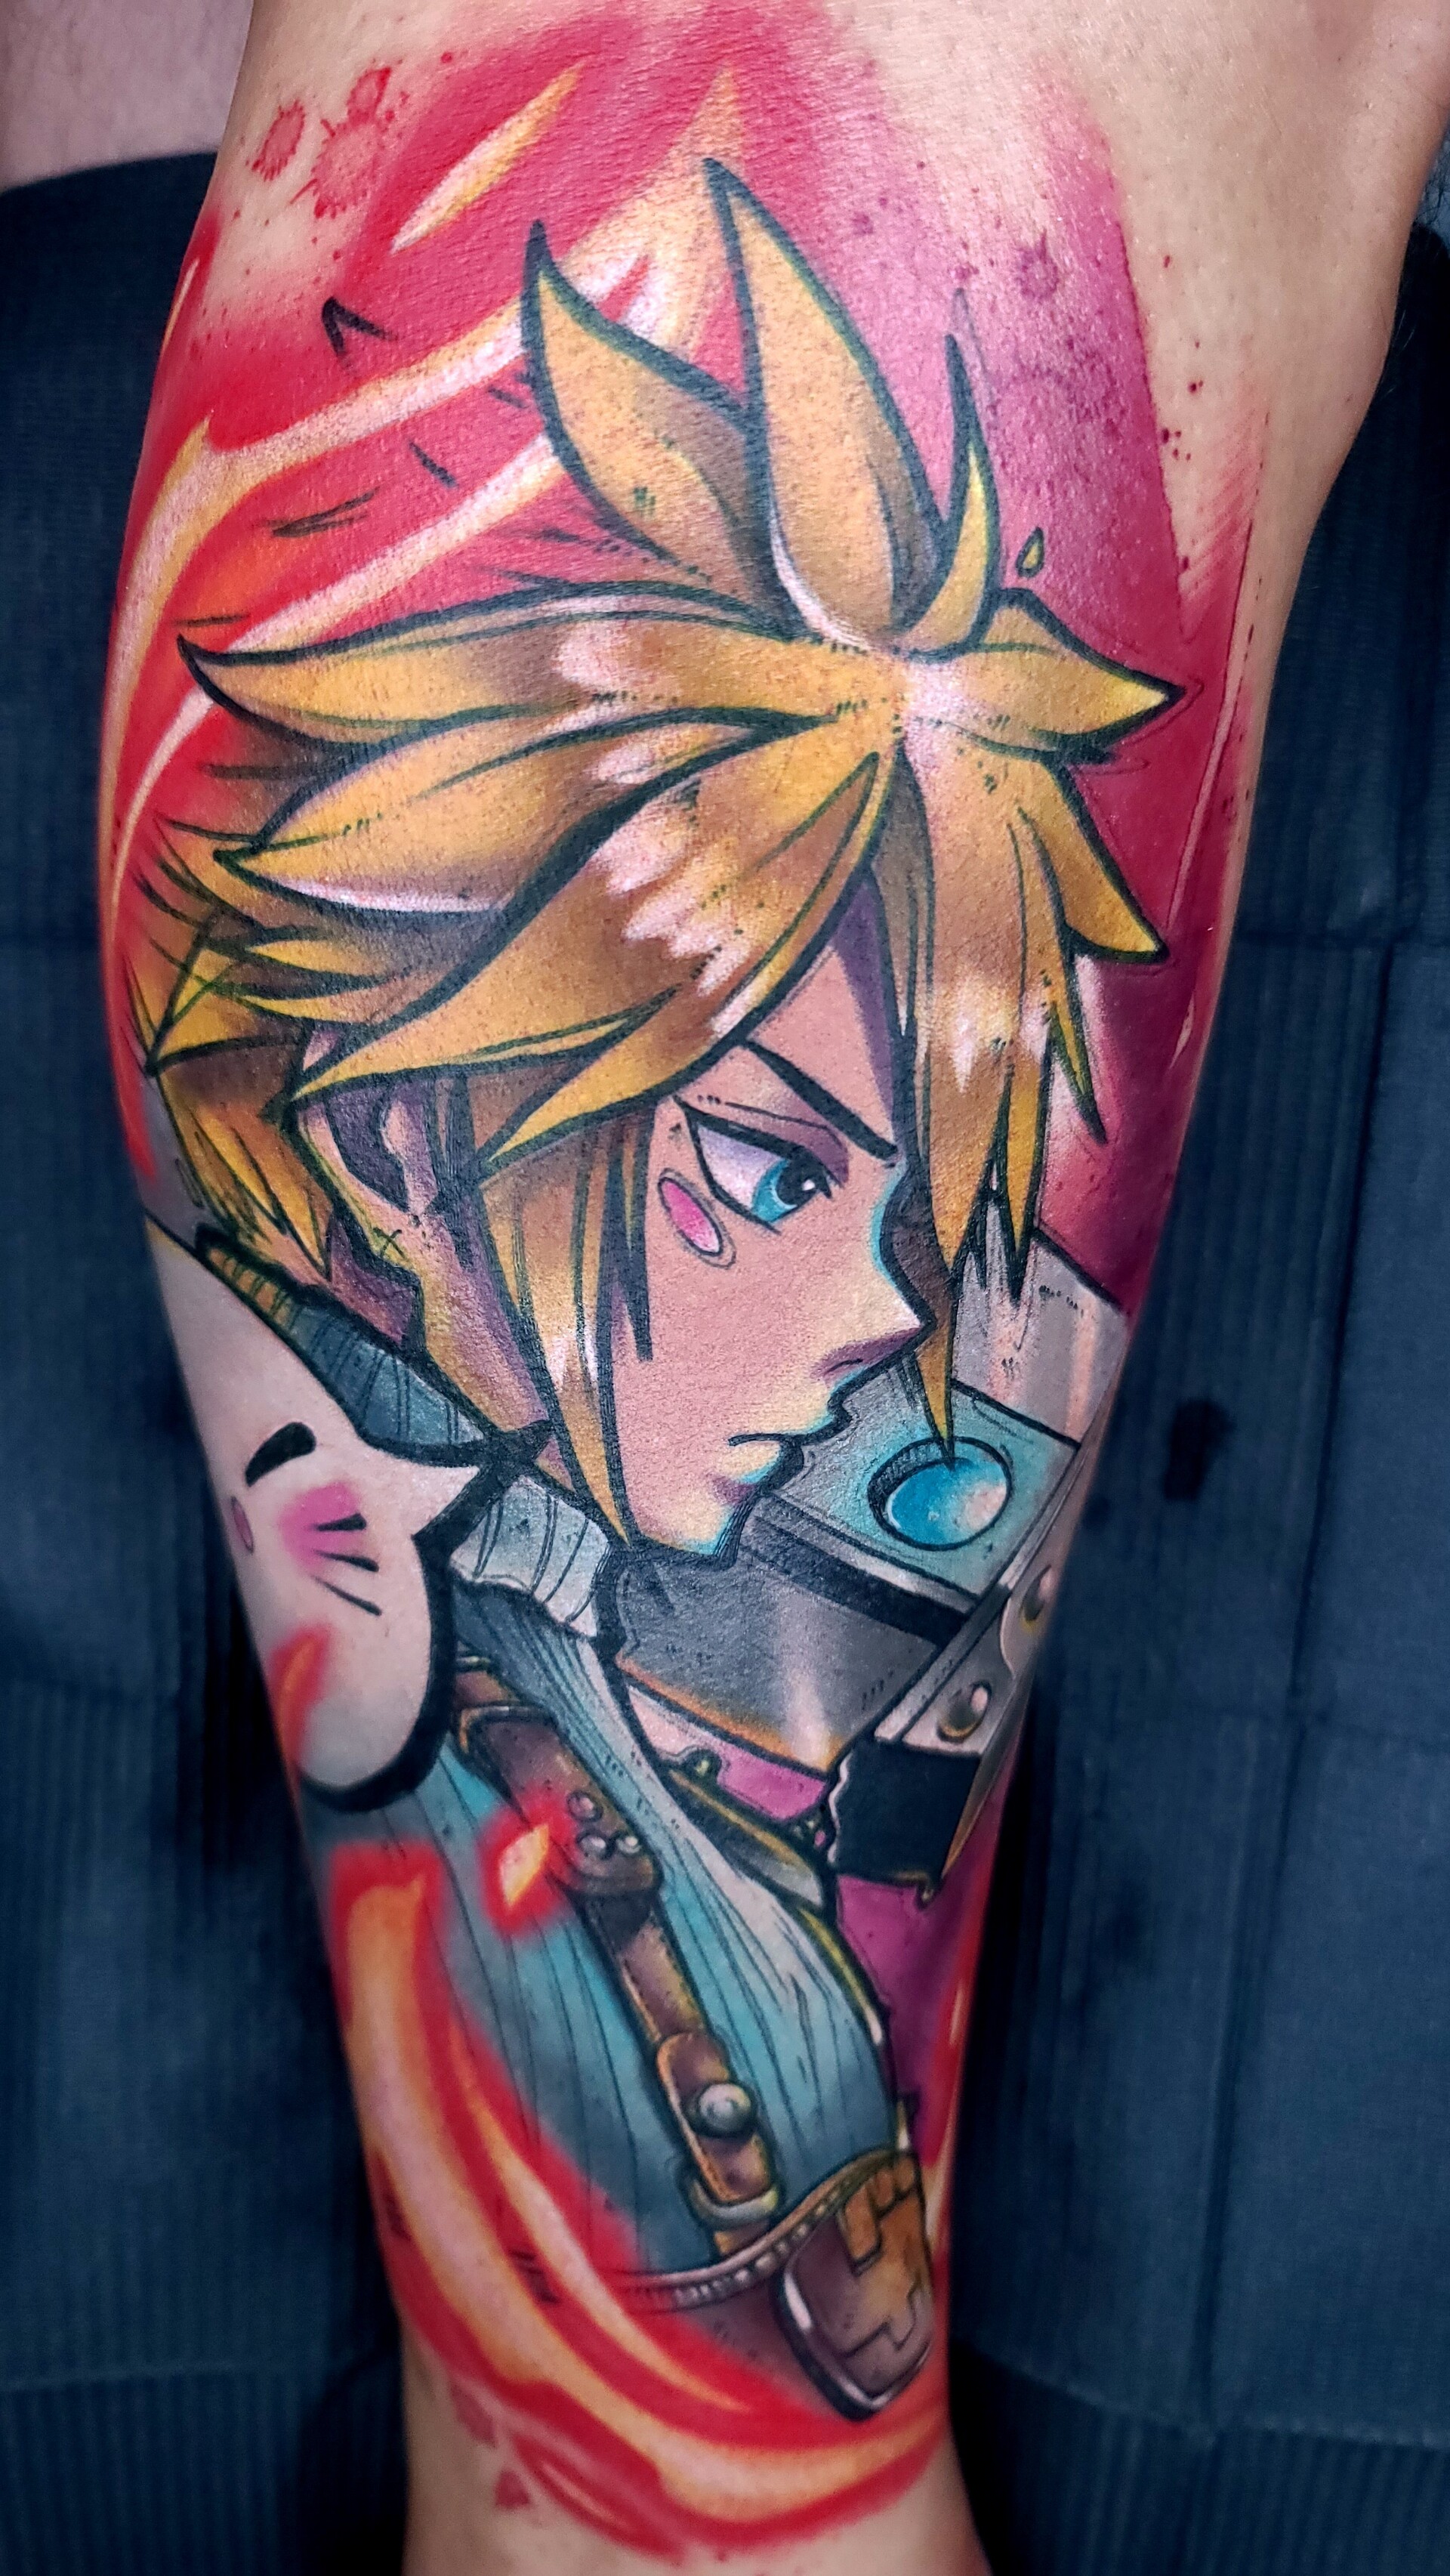 I see you ViVi Tattoo and raise you my Cloud Strife FIXED  rgaming